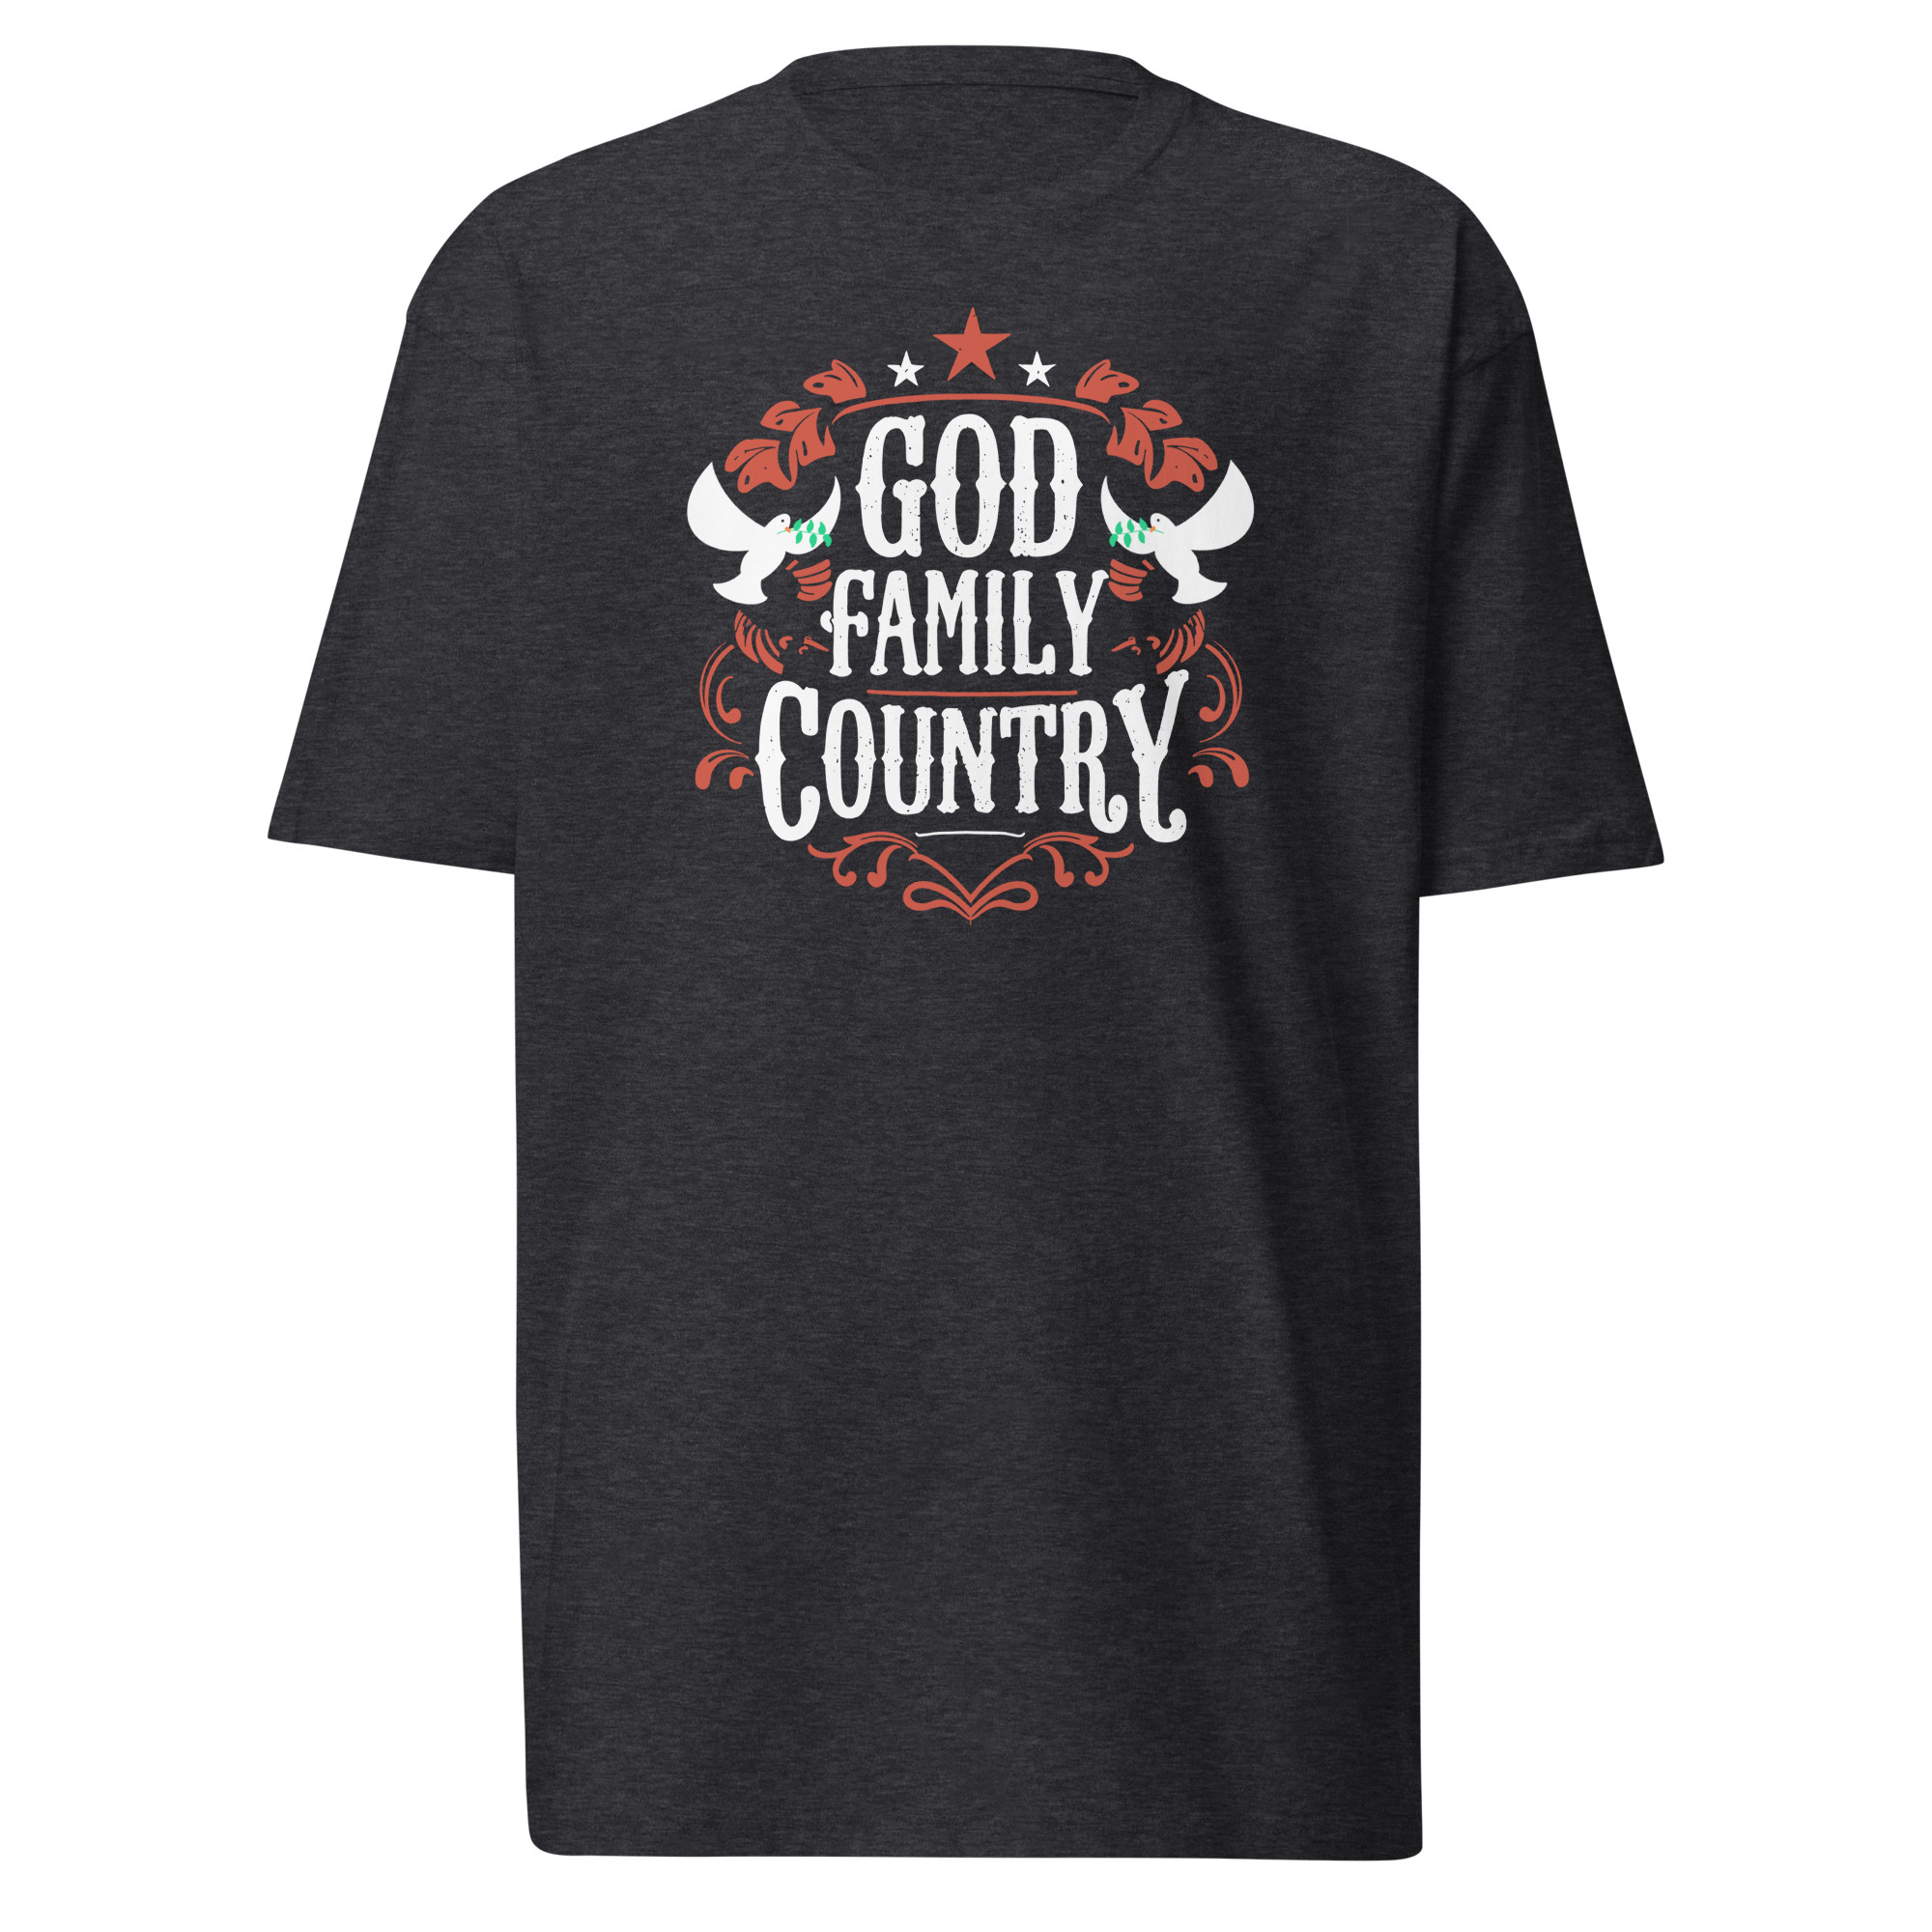 God, Family, Country T-Shirt - Charcoal Heather / S